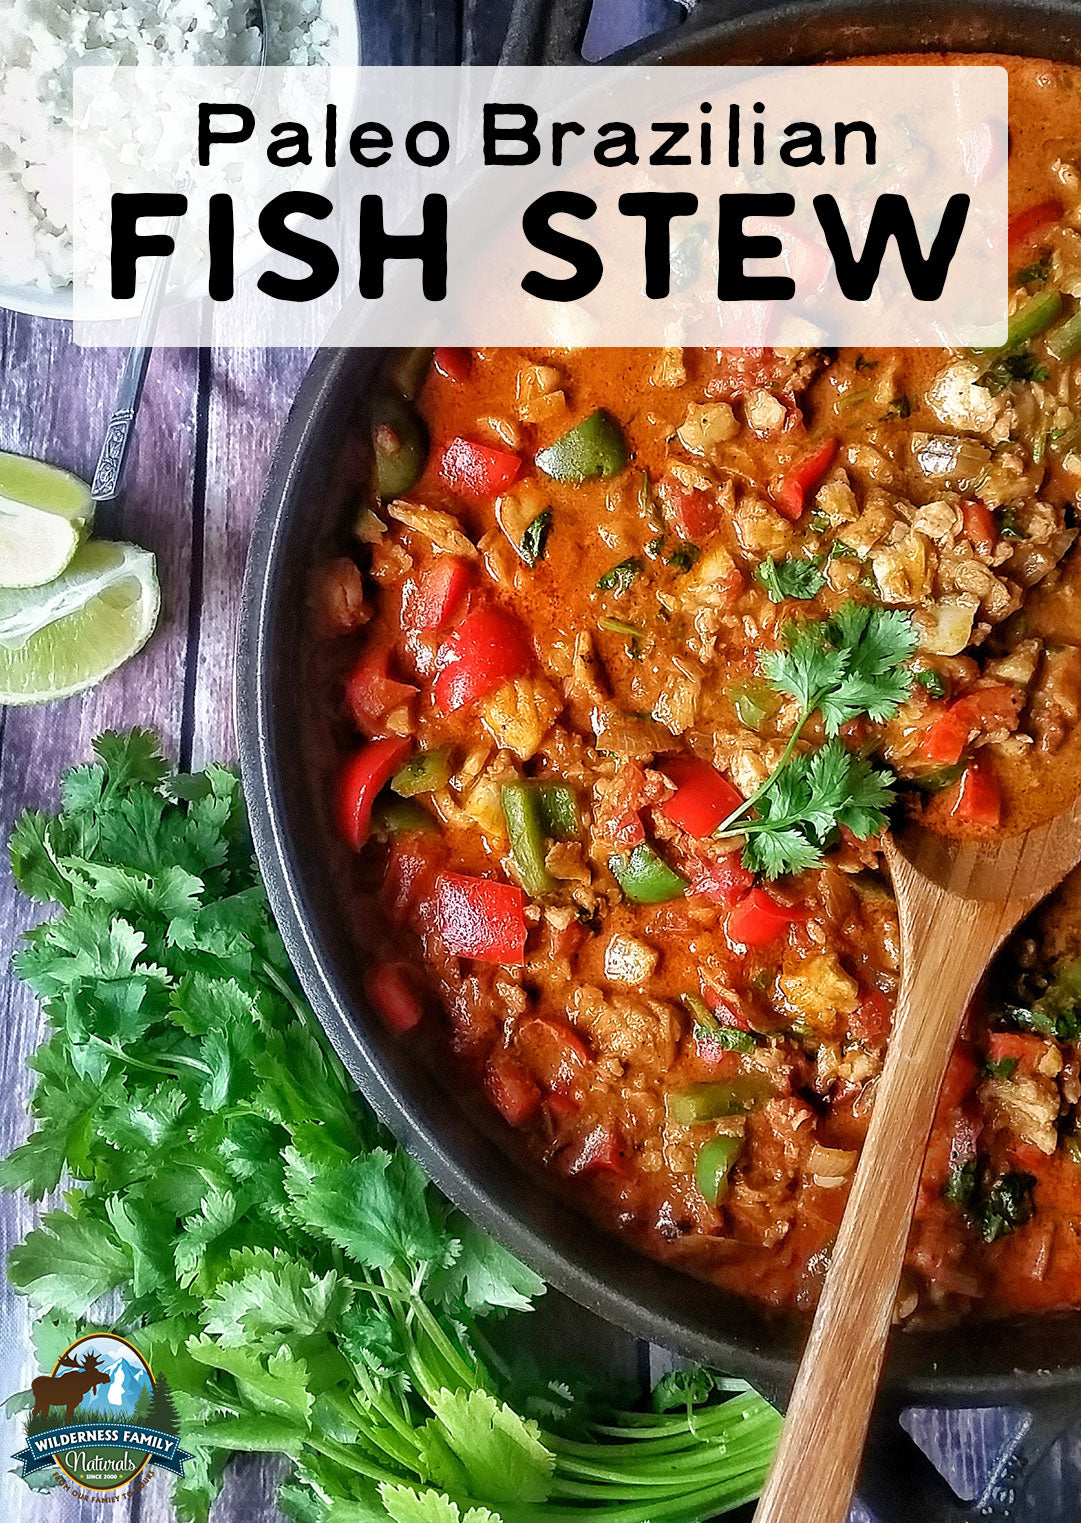 Paleo Brazilian Fish Stew | Rich and flavorful, this traditional Paleo Brazilian fish stew uses sustainably sourced red palm oil and is full of nourishing broth and fresh flavors like lime, chili, and cilantro! | WildernessFamilyNaturals.com